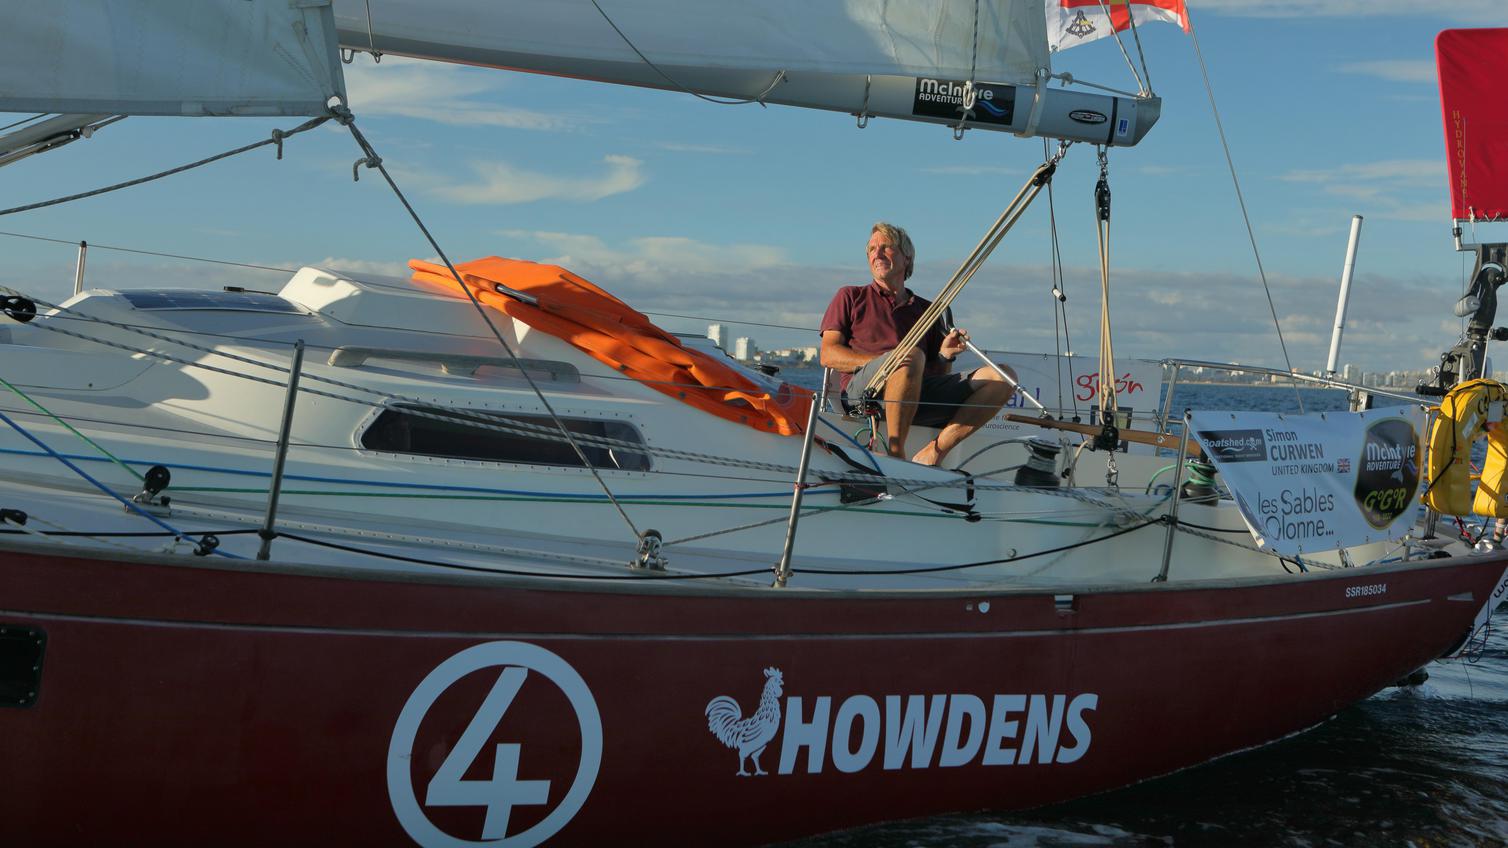 Simon Curwen on a Howdens branded boat in the Golden Globe Race